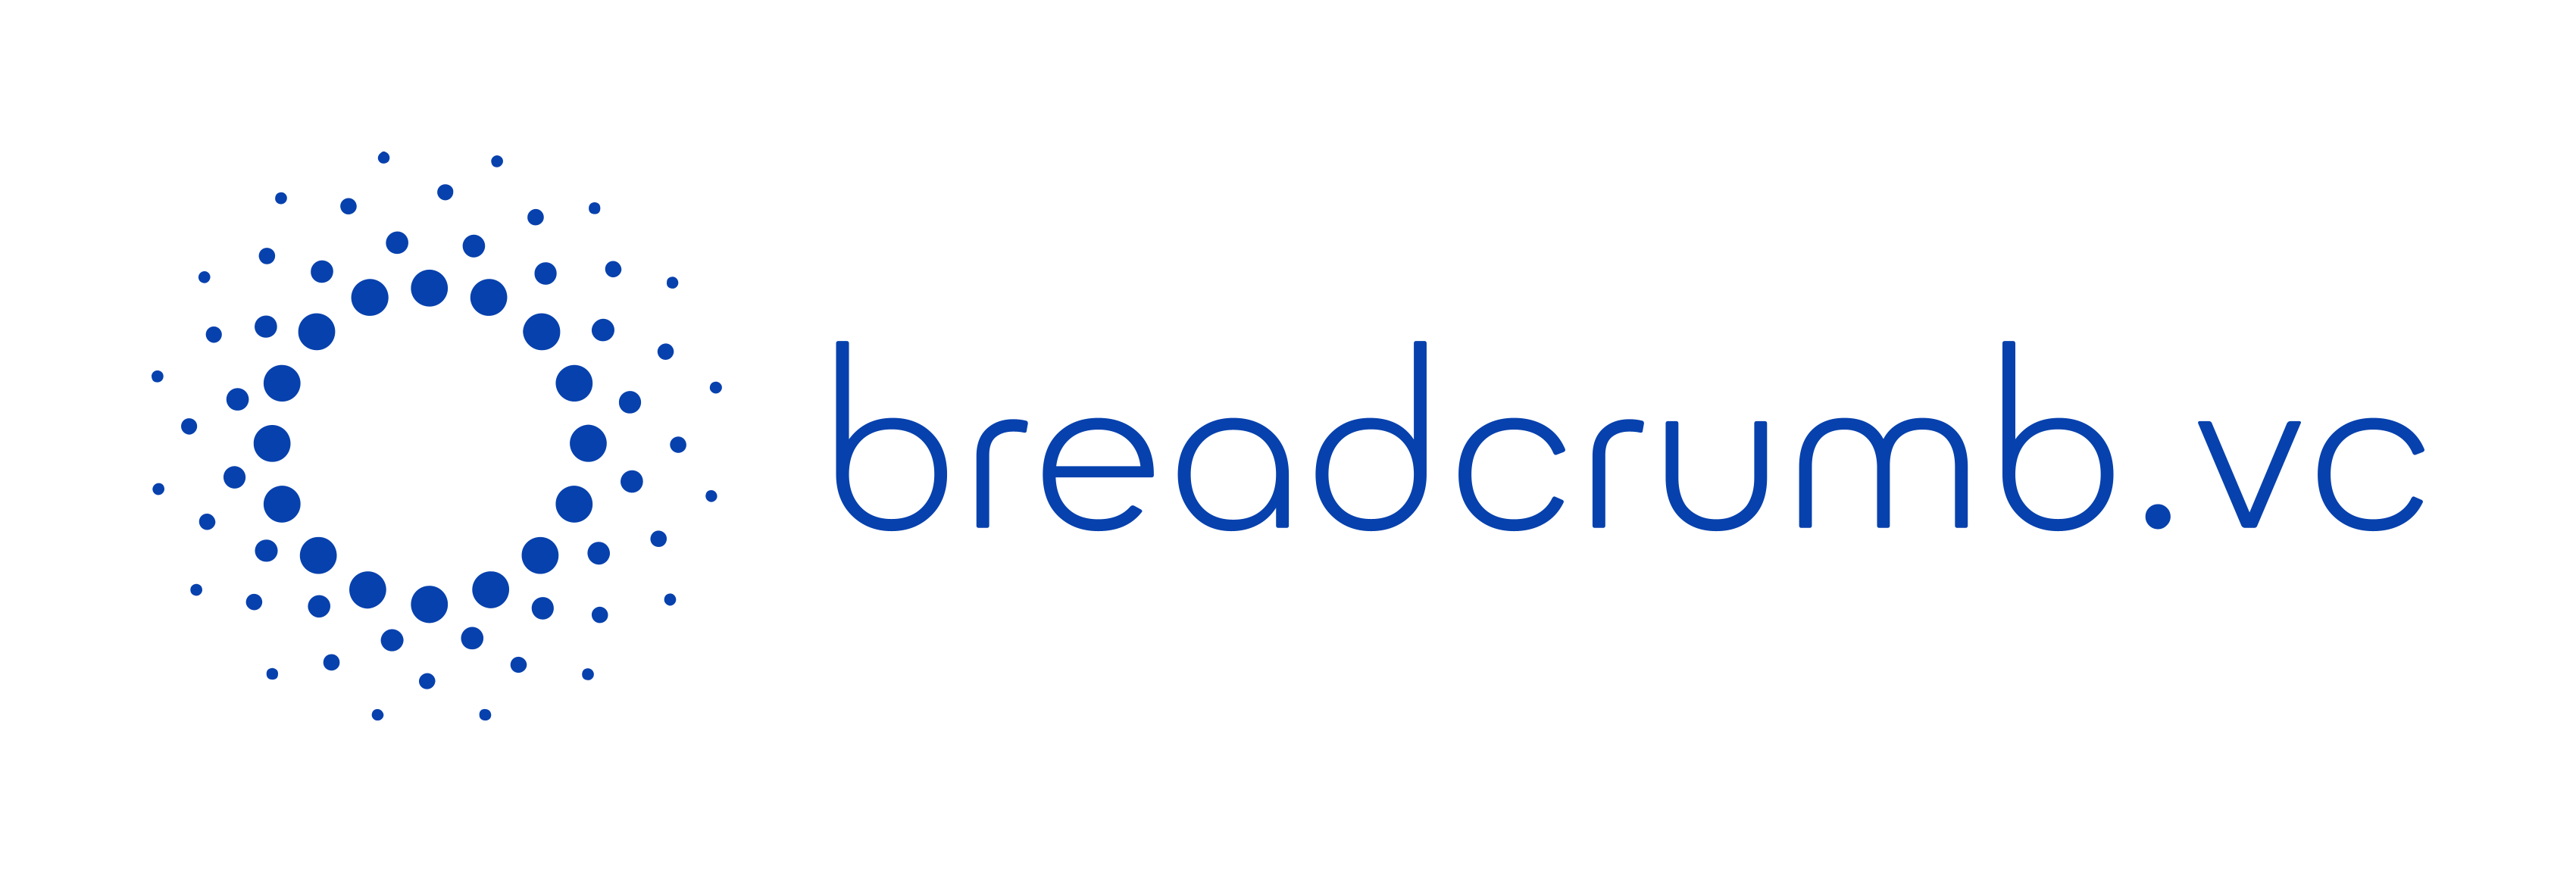 Breadcrumb.vc: A Network Effects Guide for Founders